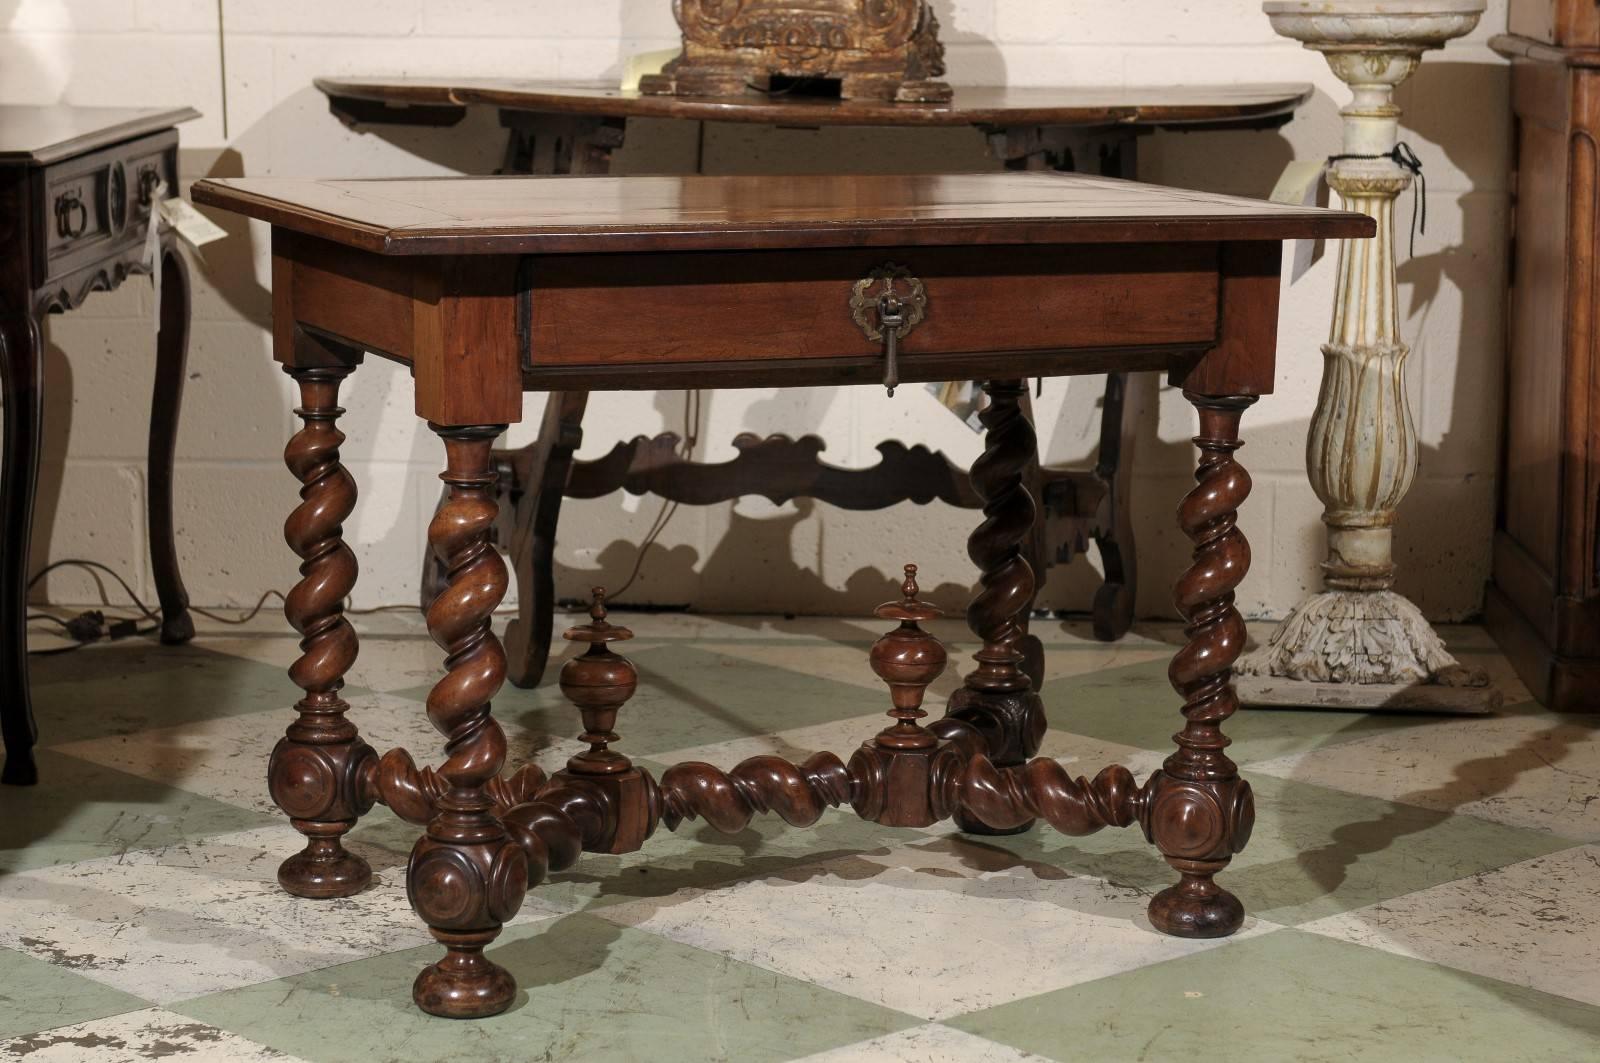 18th century walnut table with barley twist legs and stretcher and one drawer.